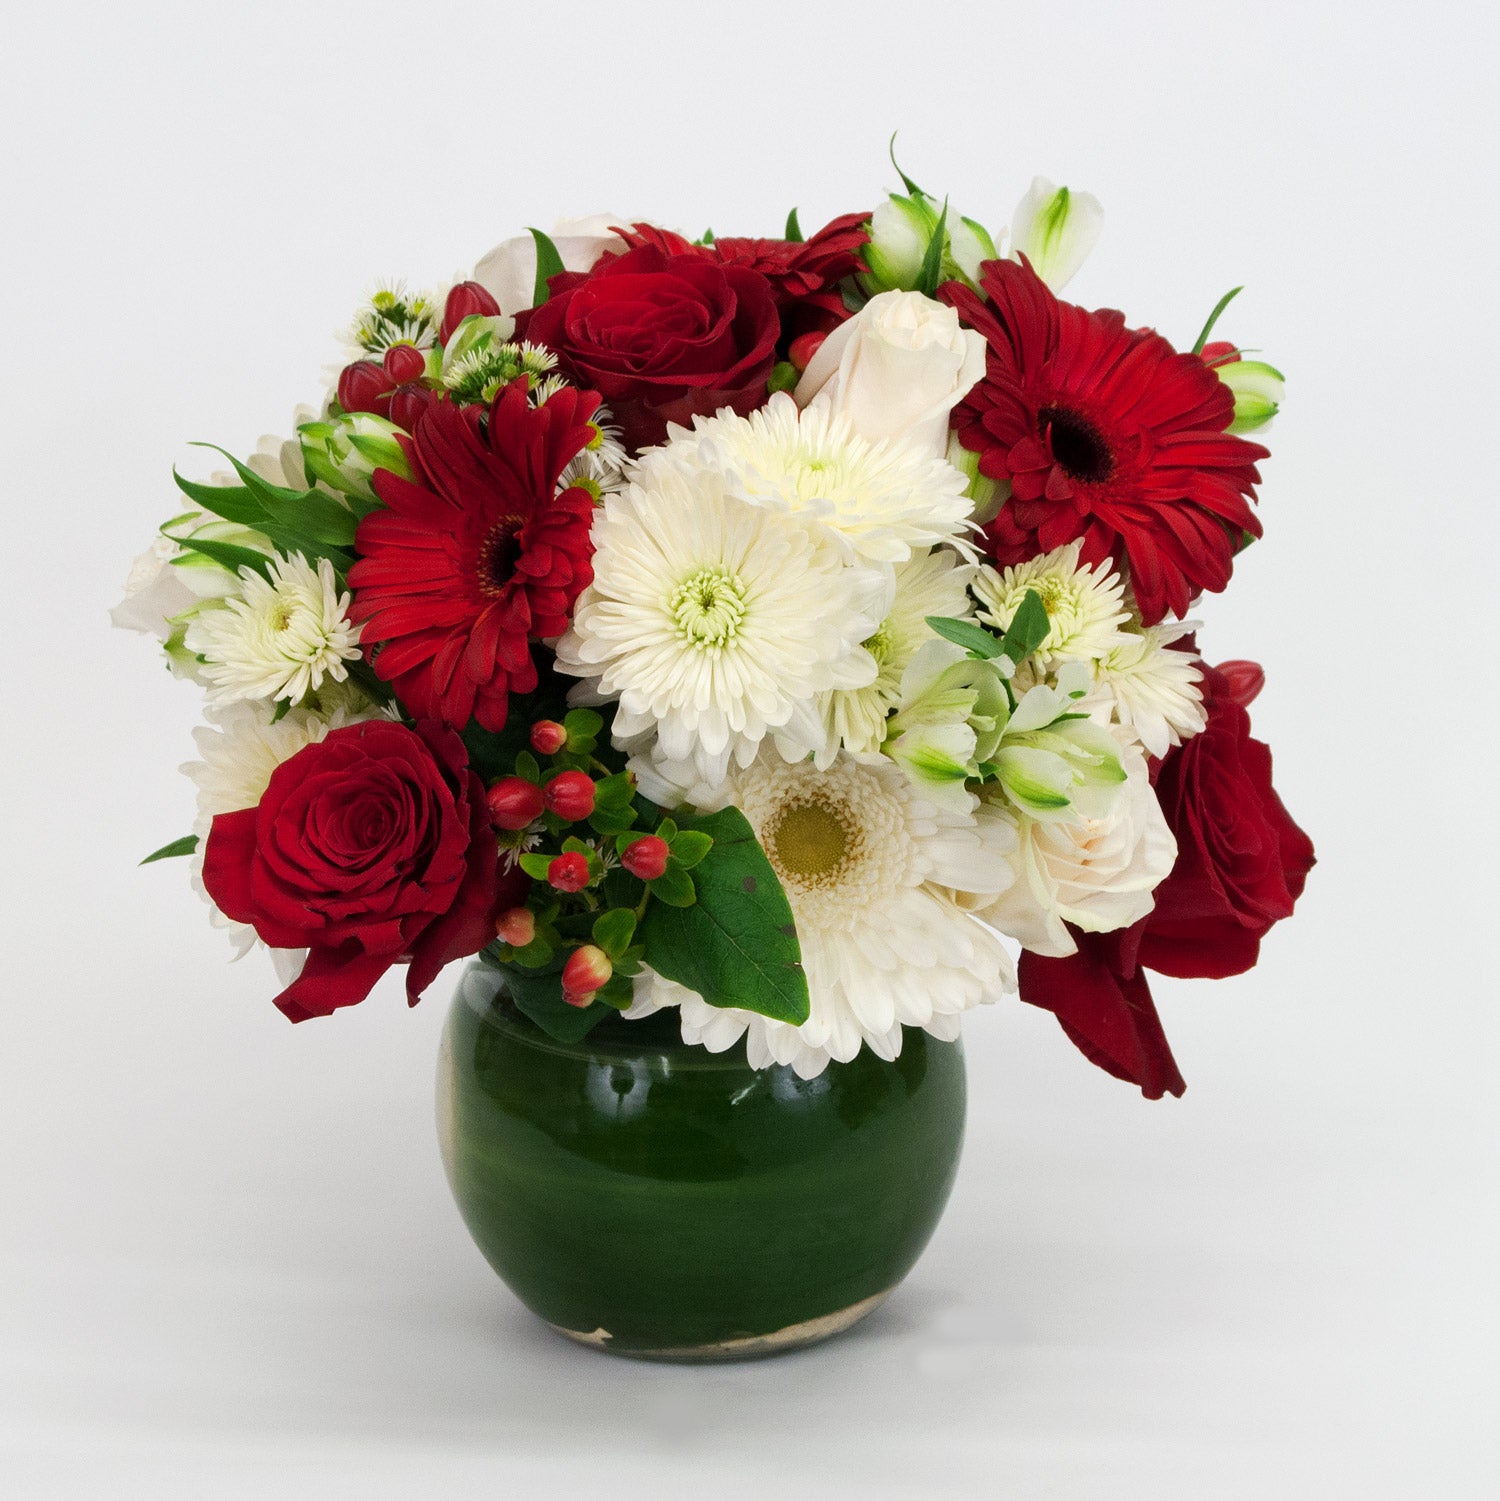 Festive Red and White Bouquet